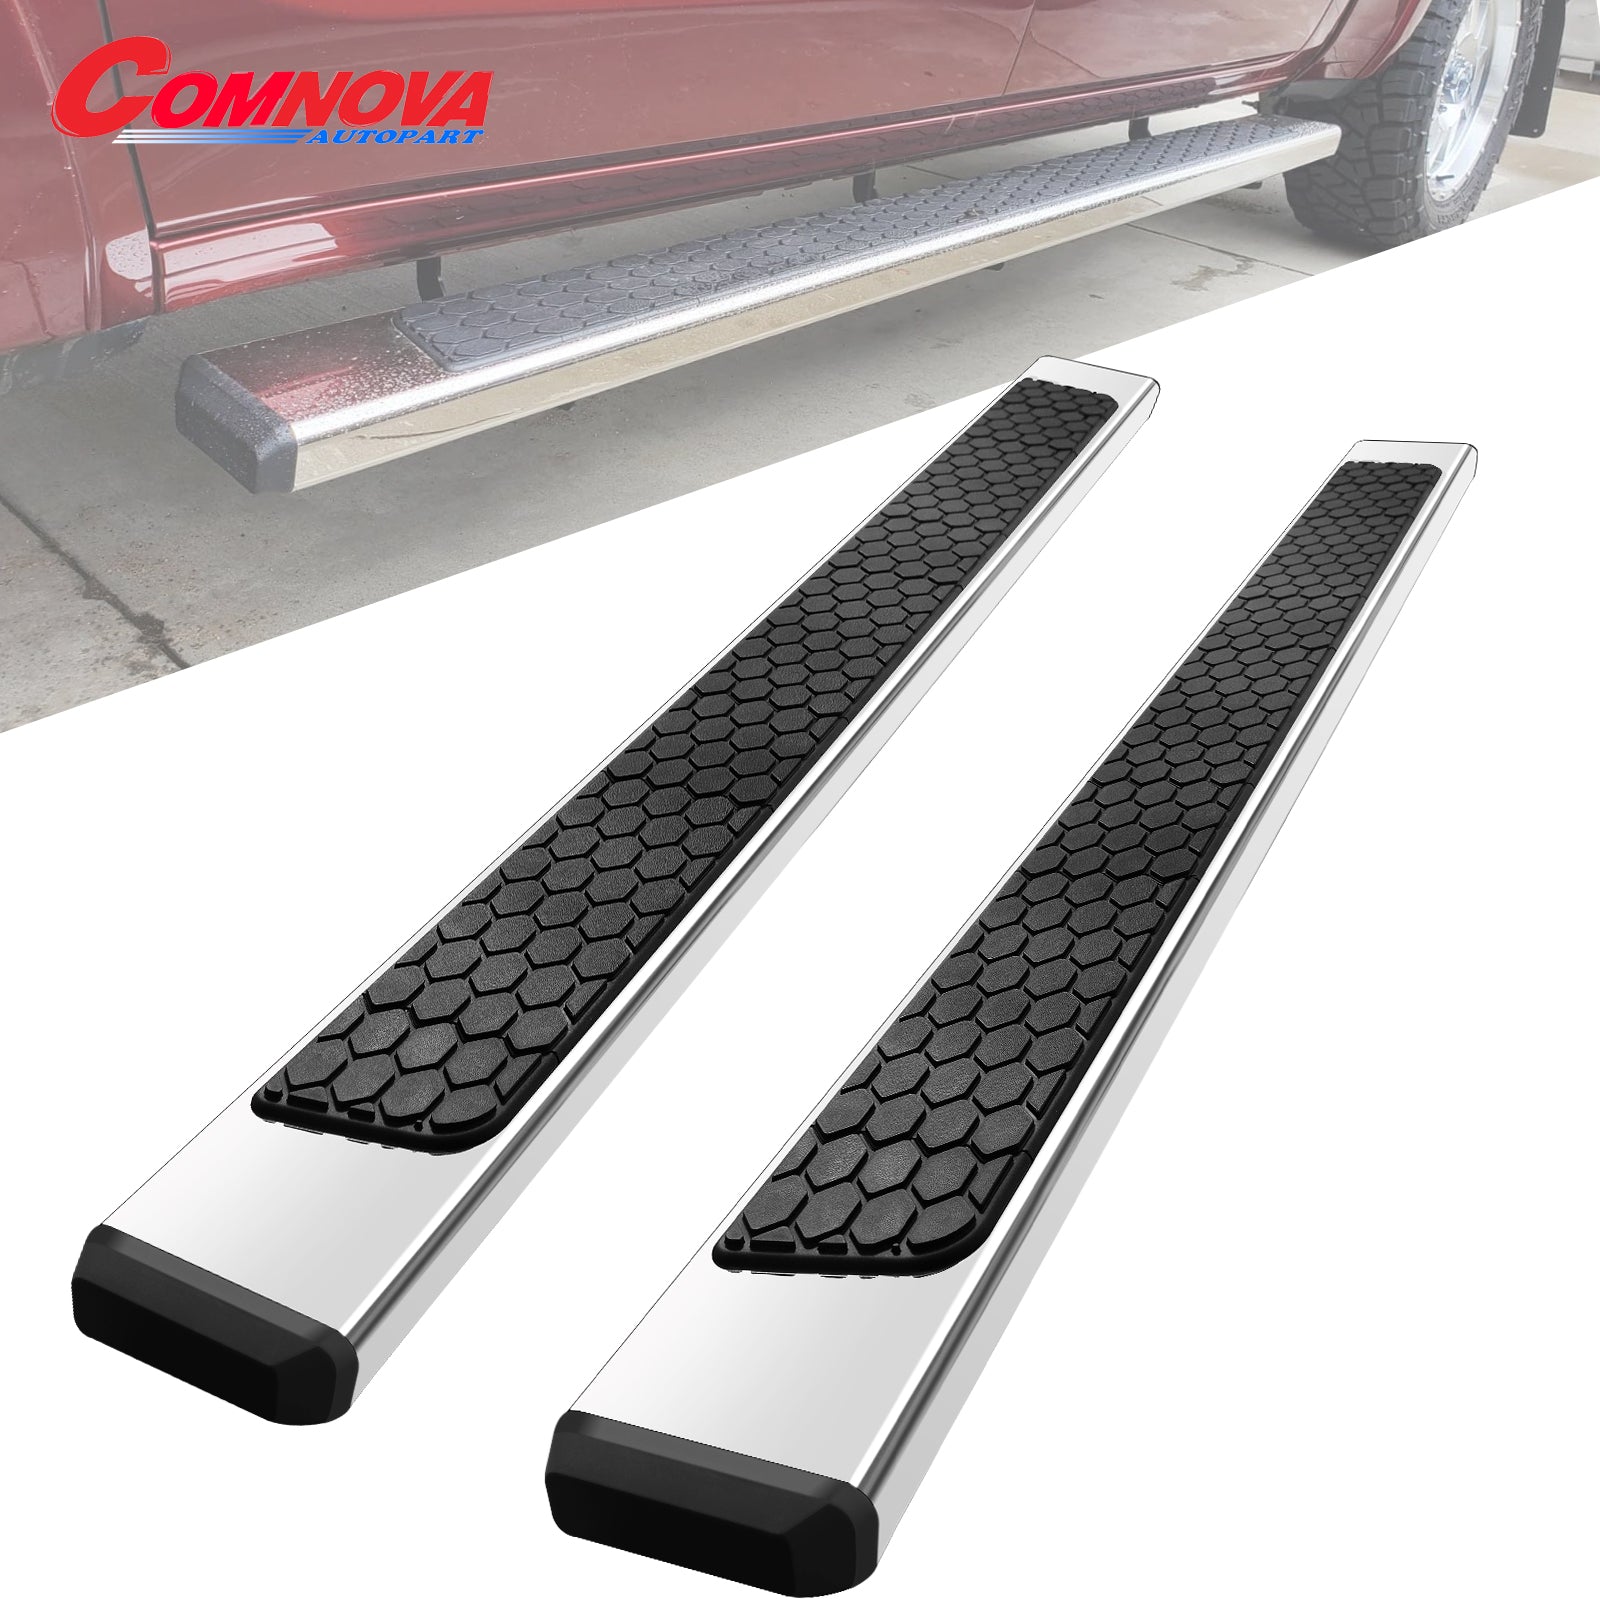 Stainless Steel Running Boards Compatible with 2019-2024 Chevy Silverado/Serria 1500 Double Cab, 2020-2024 Chevy Silverado/Serria 2500HD 3500HD Double Cab D6 Style. - COMNOVA AUTOPART